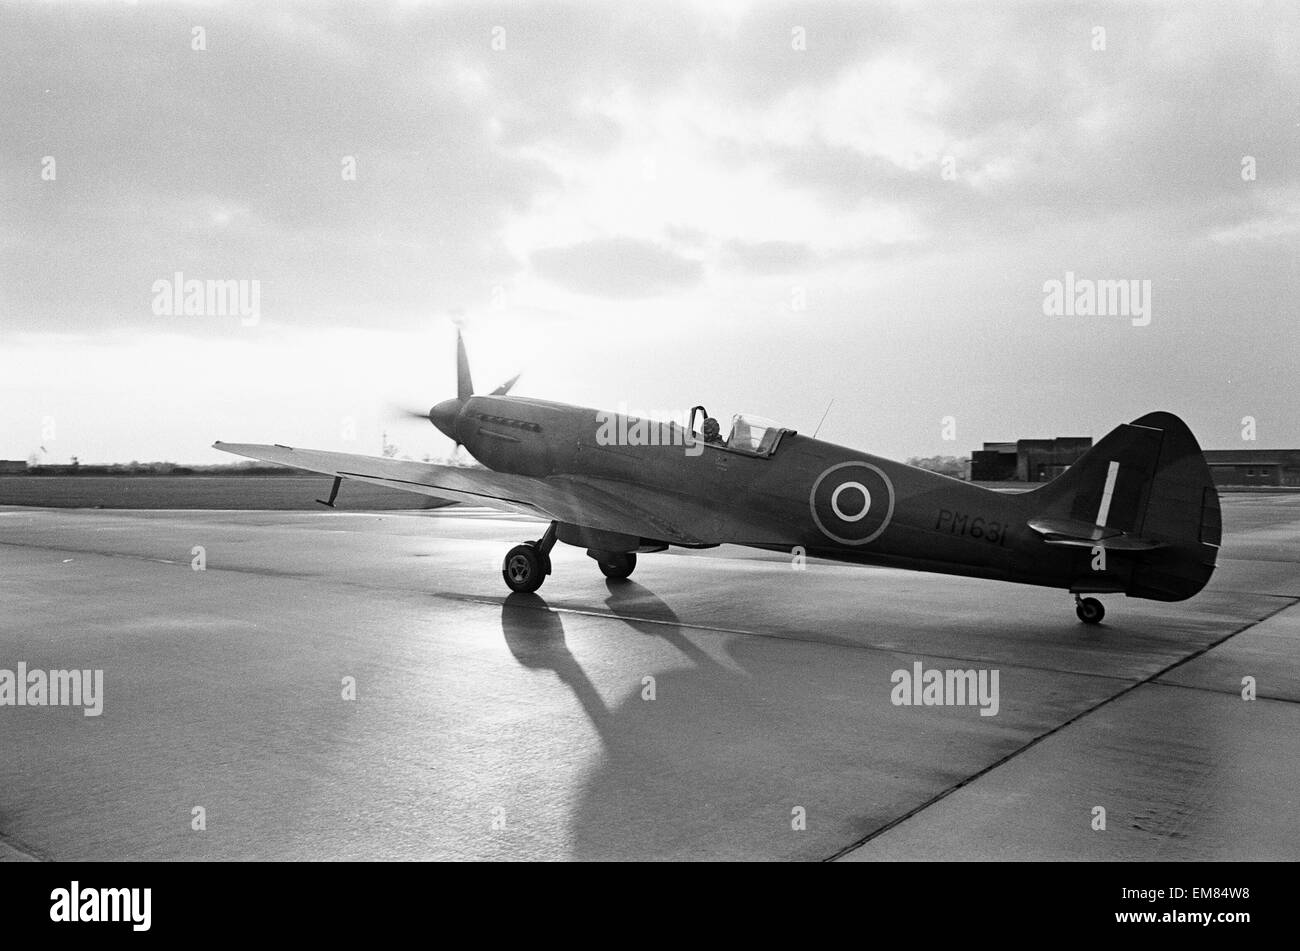 Spitfire PM631 a mk PRXIX aircraft seen here taxi-ing along the perimeter track at RAF Coltishall. The aircraft was preparing to take part in the flypast to commemorate the funeral of Winston Chuchill 26th January 1965 Stock Photo